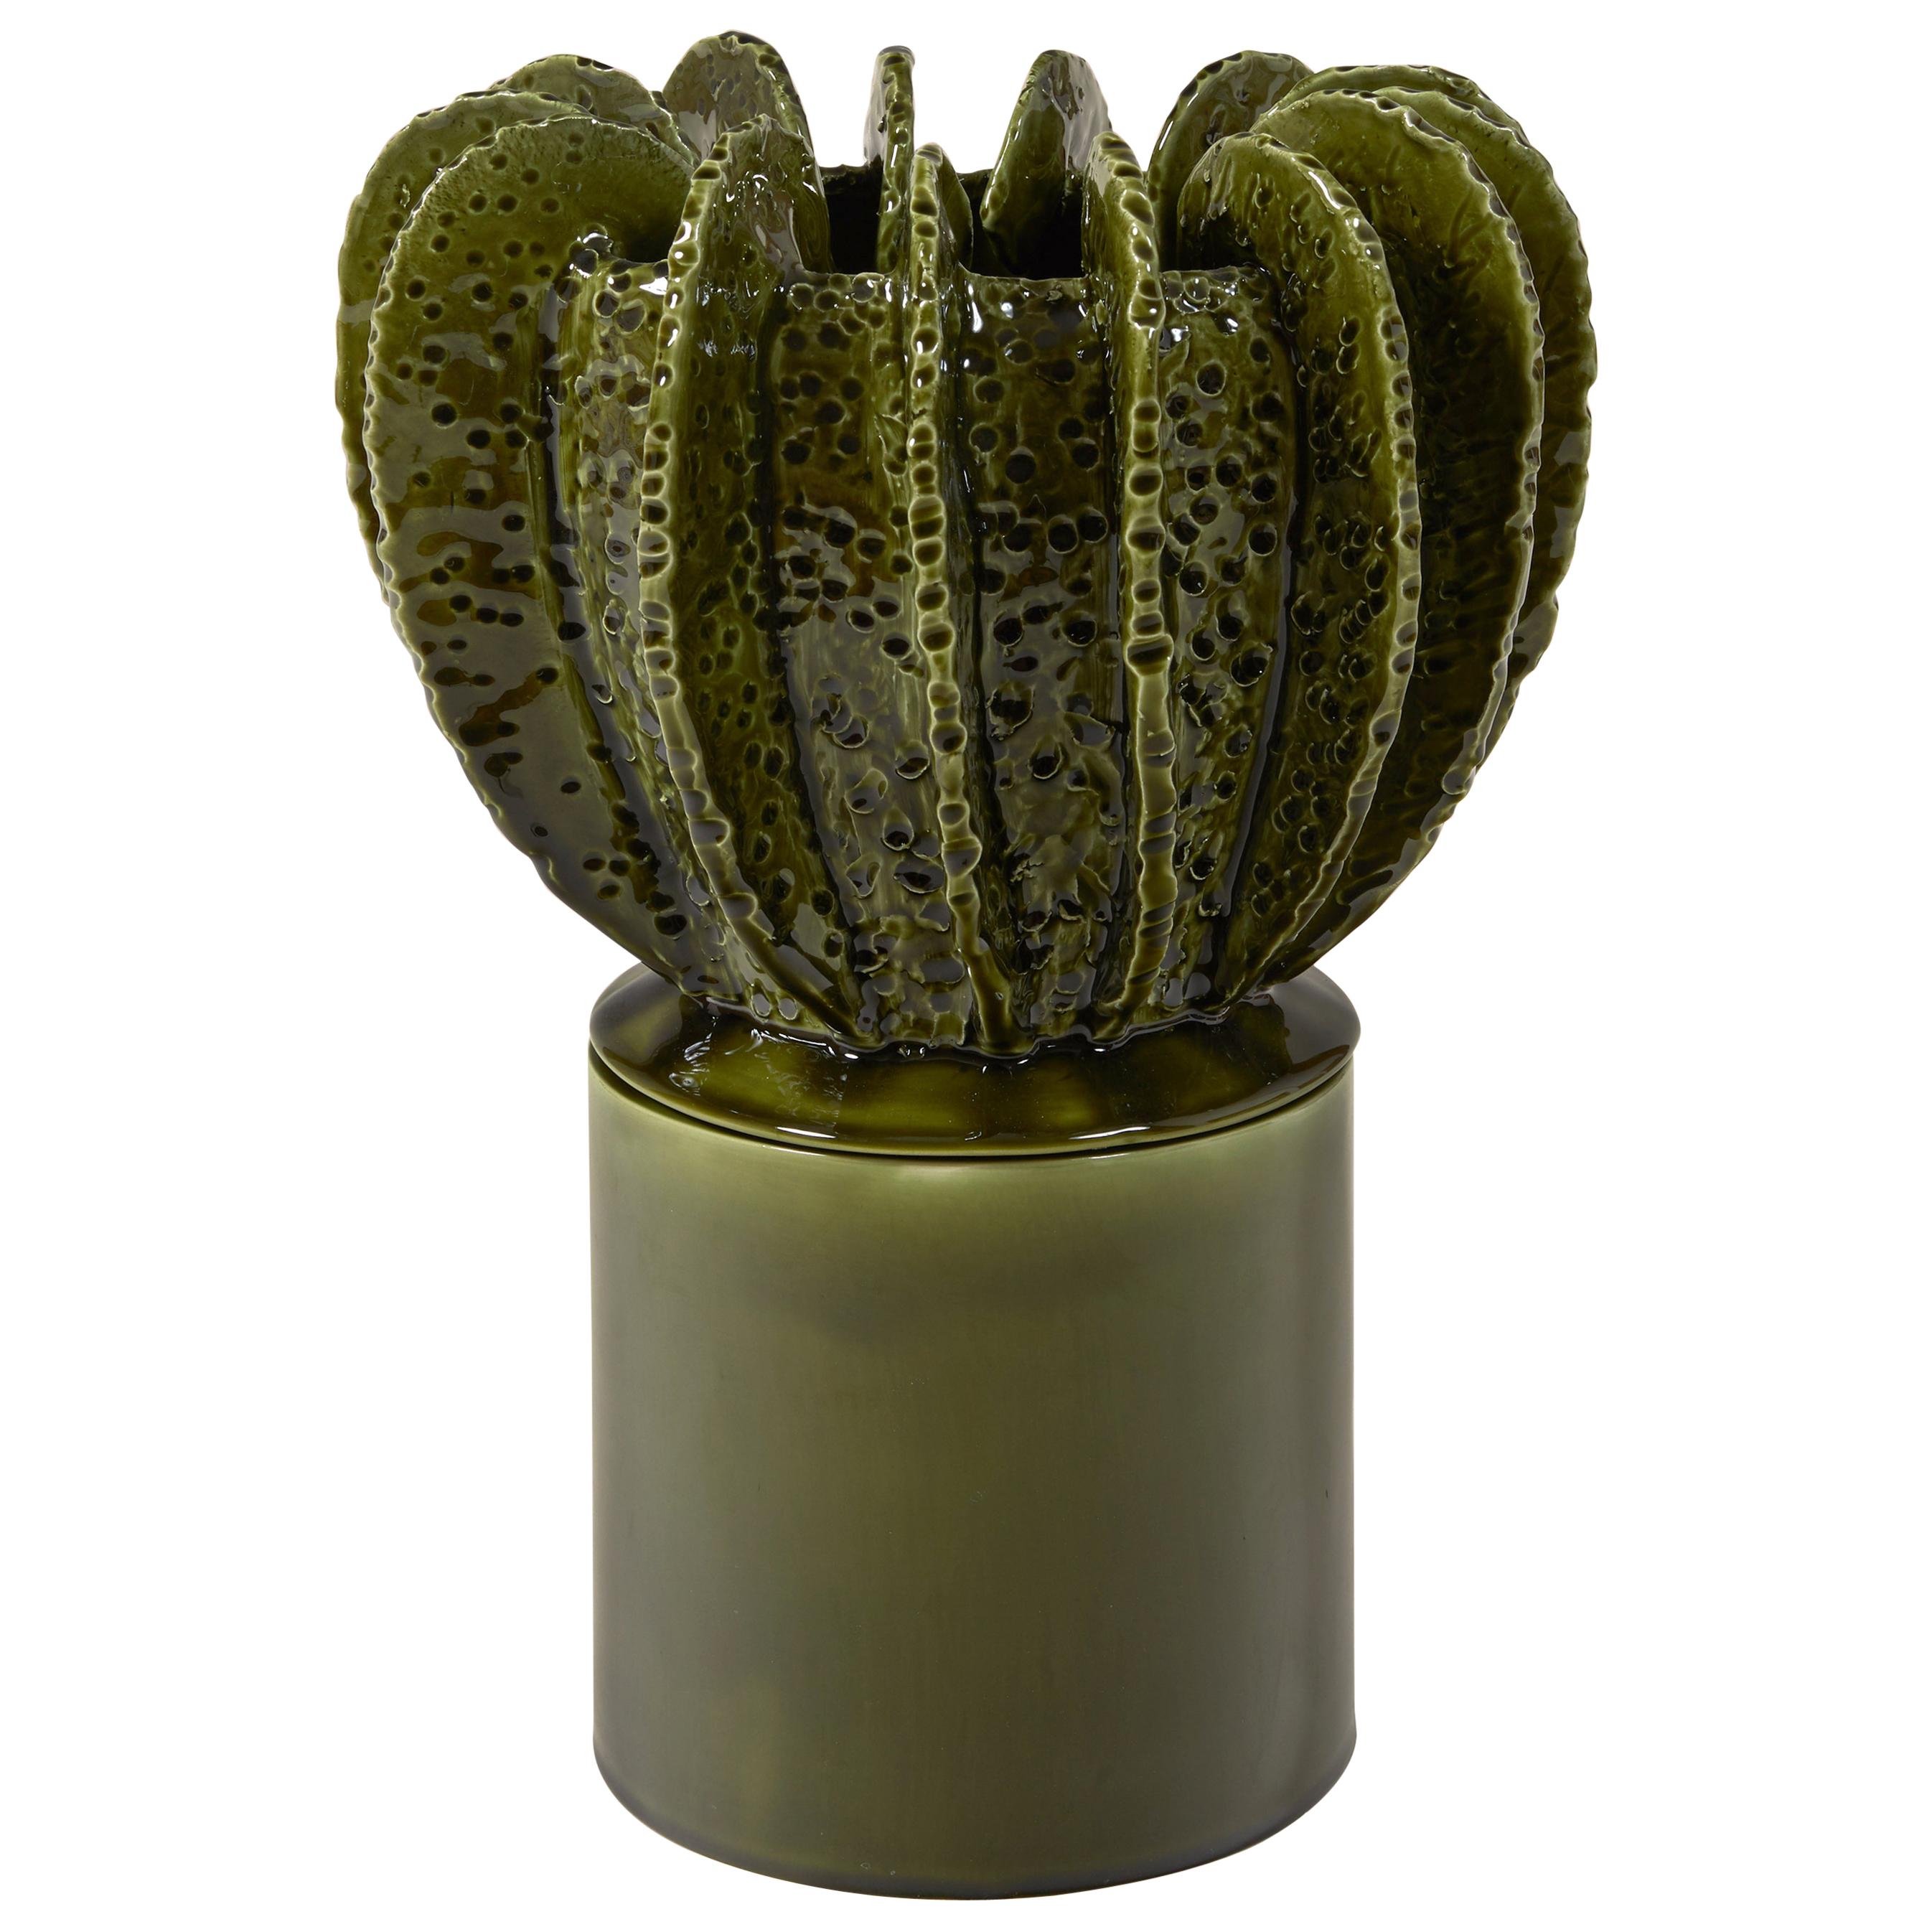 Glazed Green Large Candleholder with Sculpted Lid by Laura Gonzalez